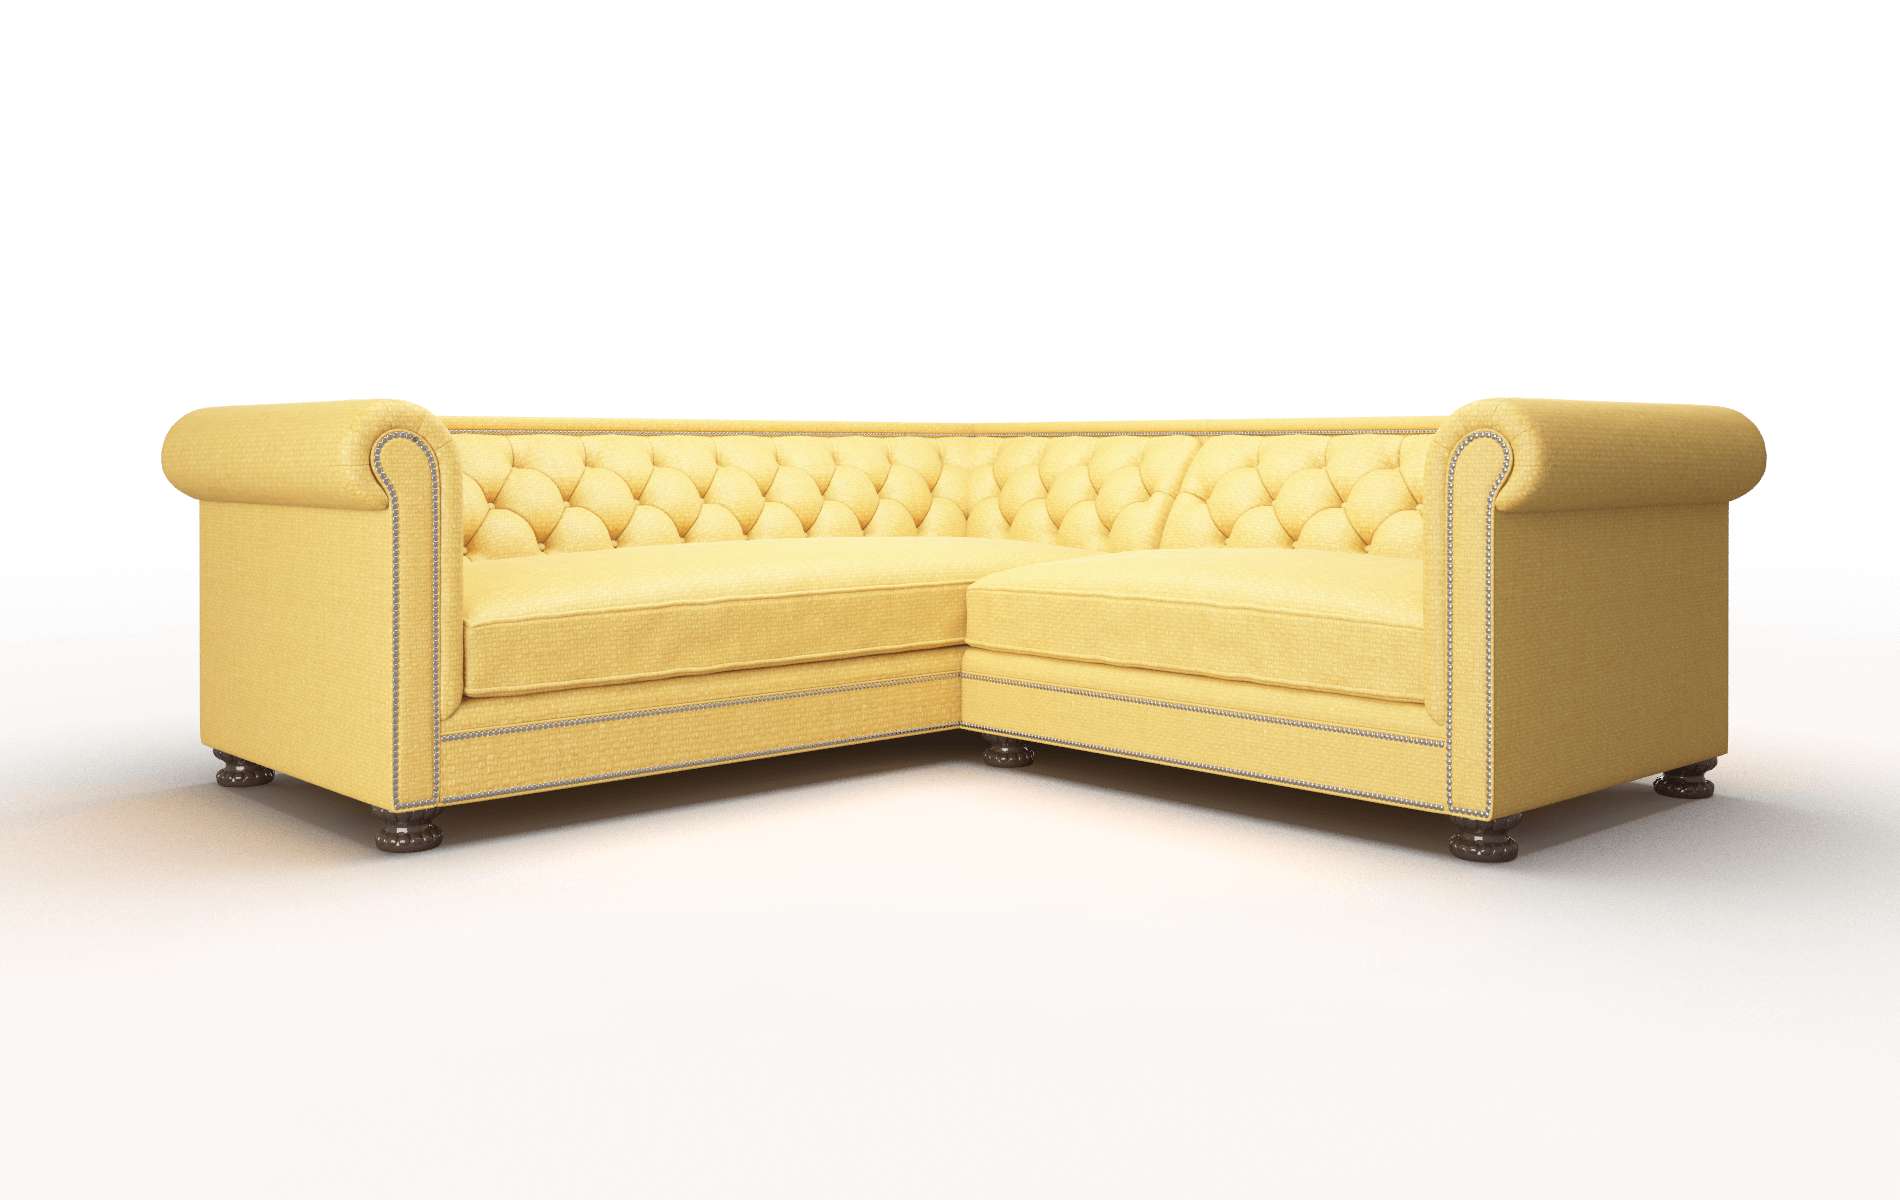 Athens Glee Aglow Sectional espresso legs